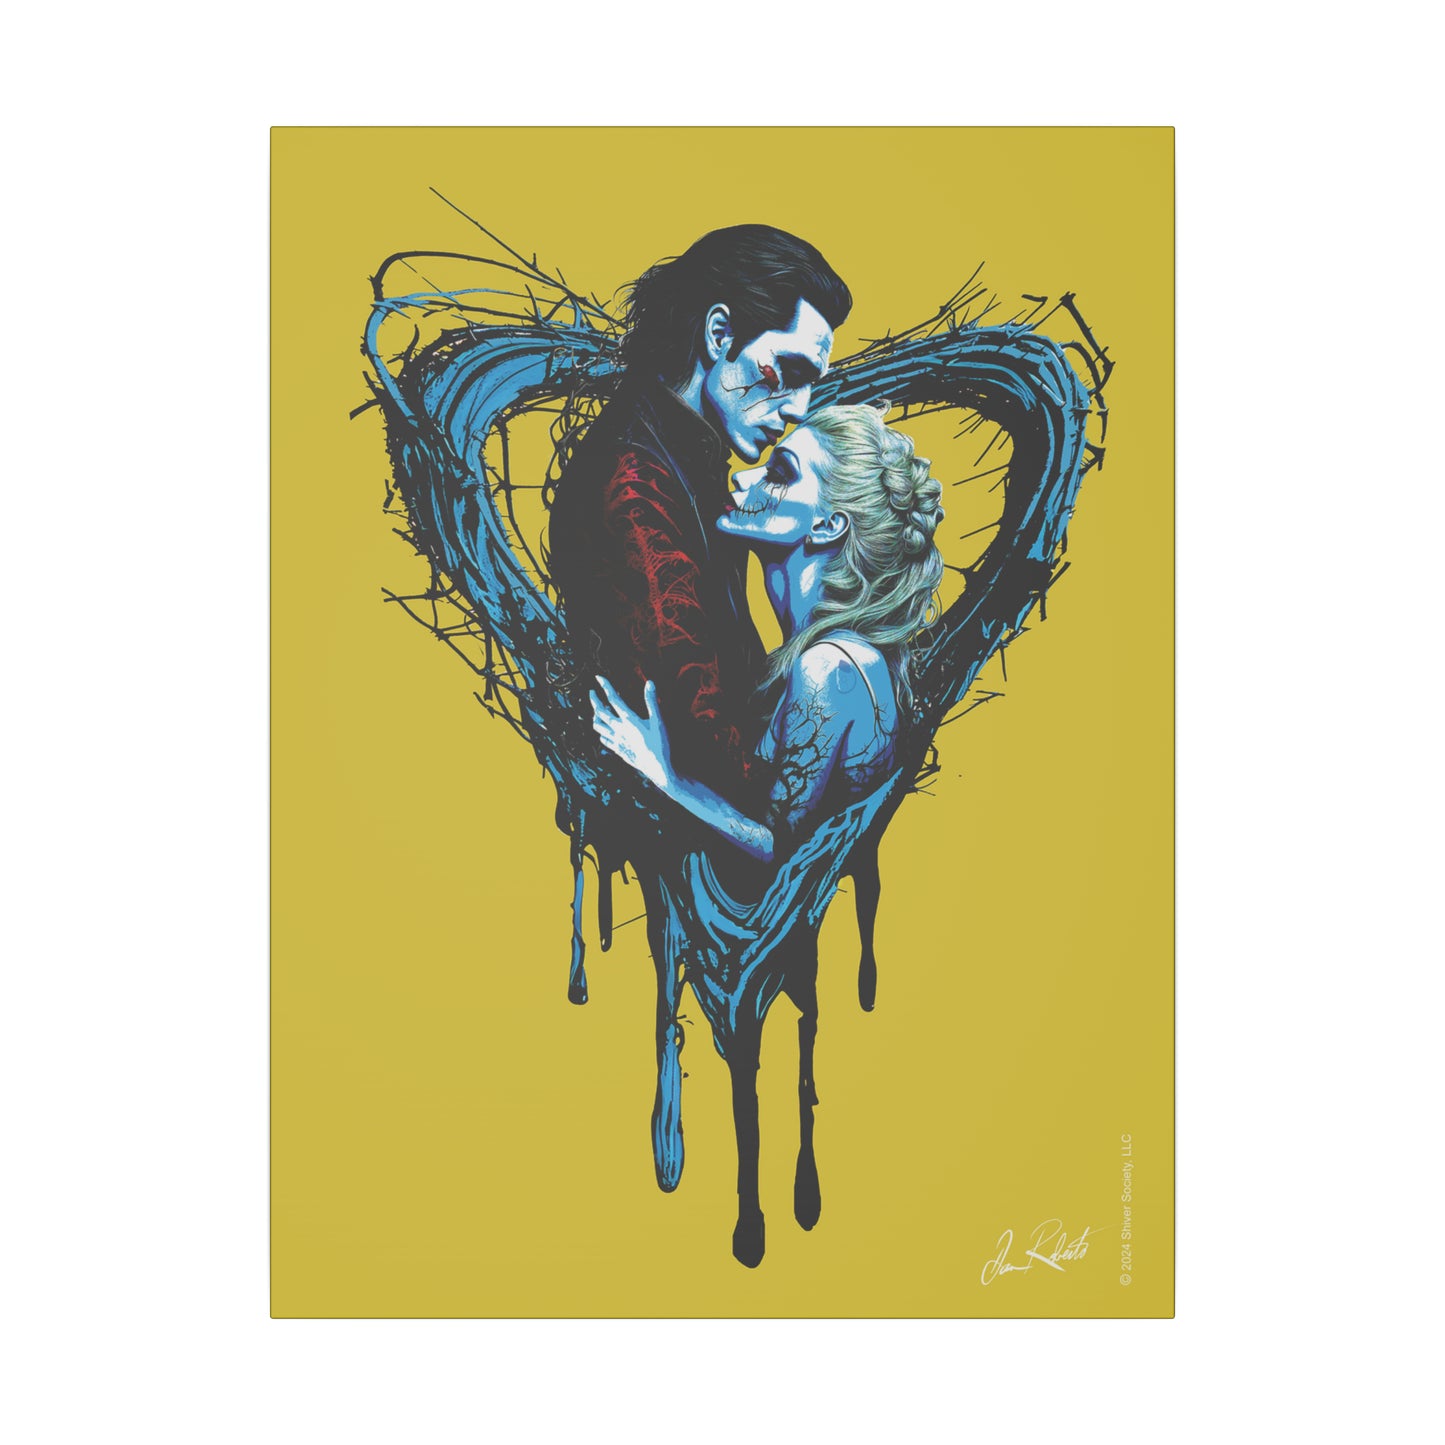 Undying Love - Giclée Print Canvas